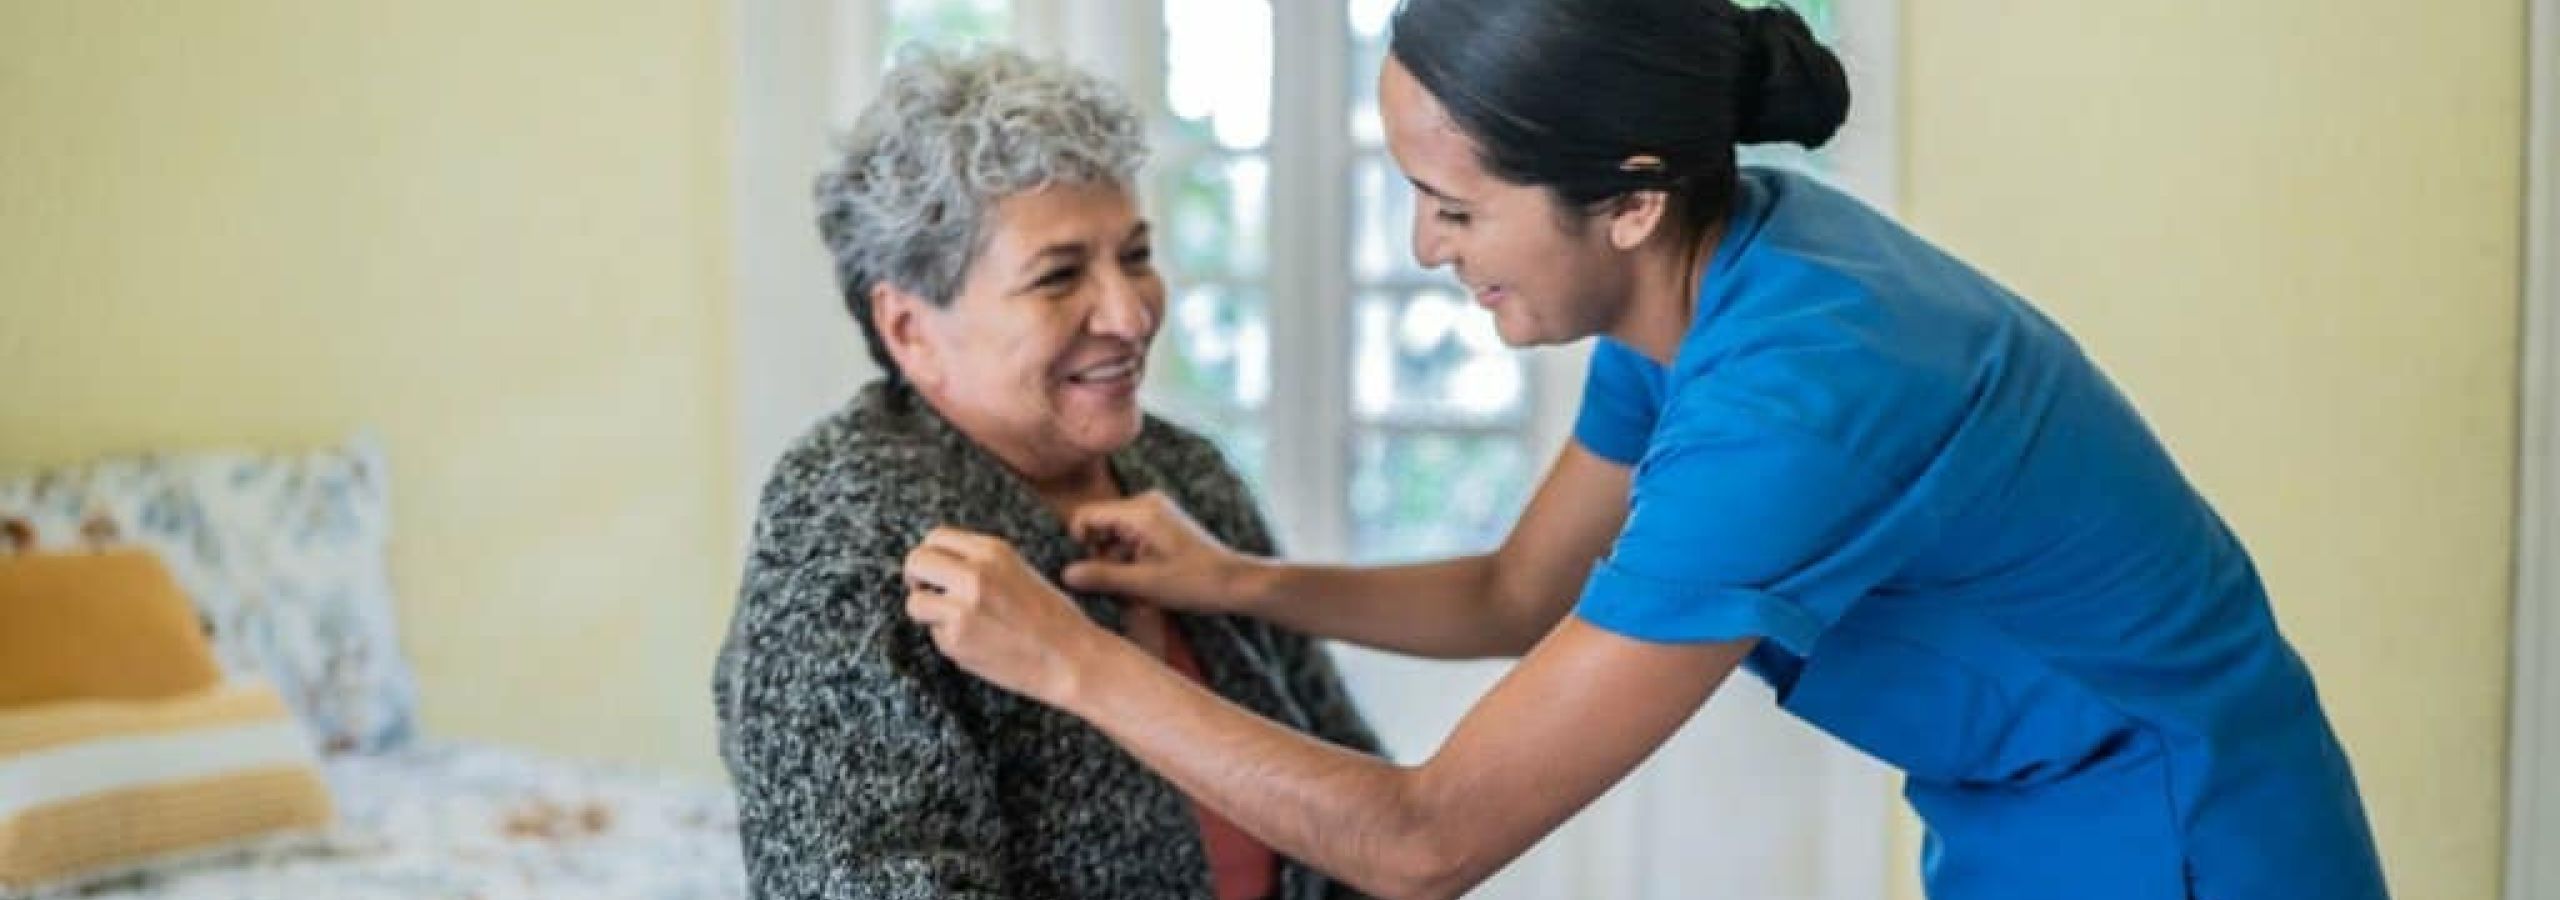 role of in-home care in ensuring seniors attend appointments